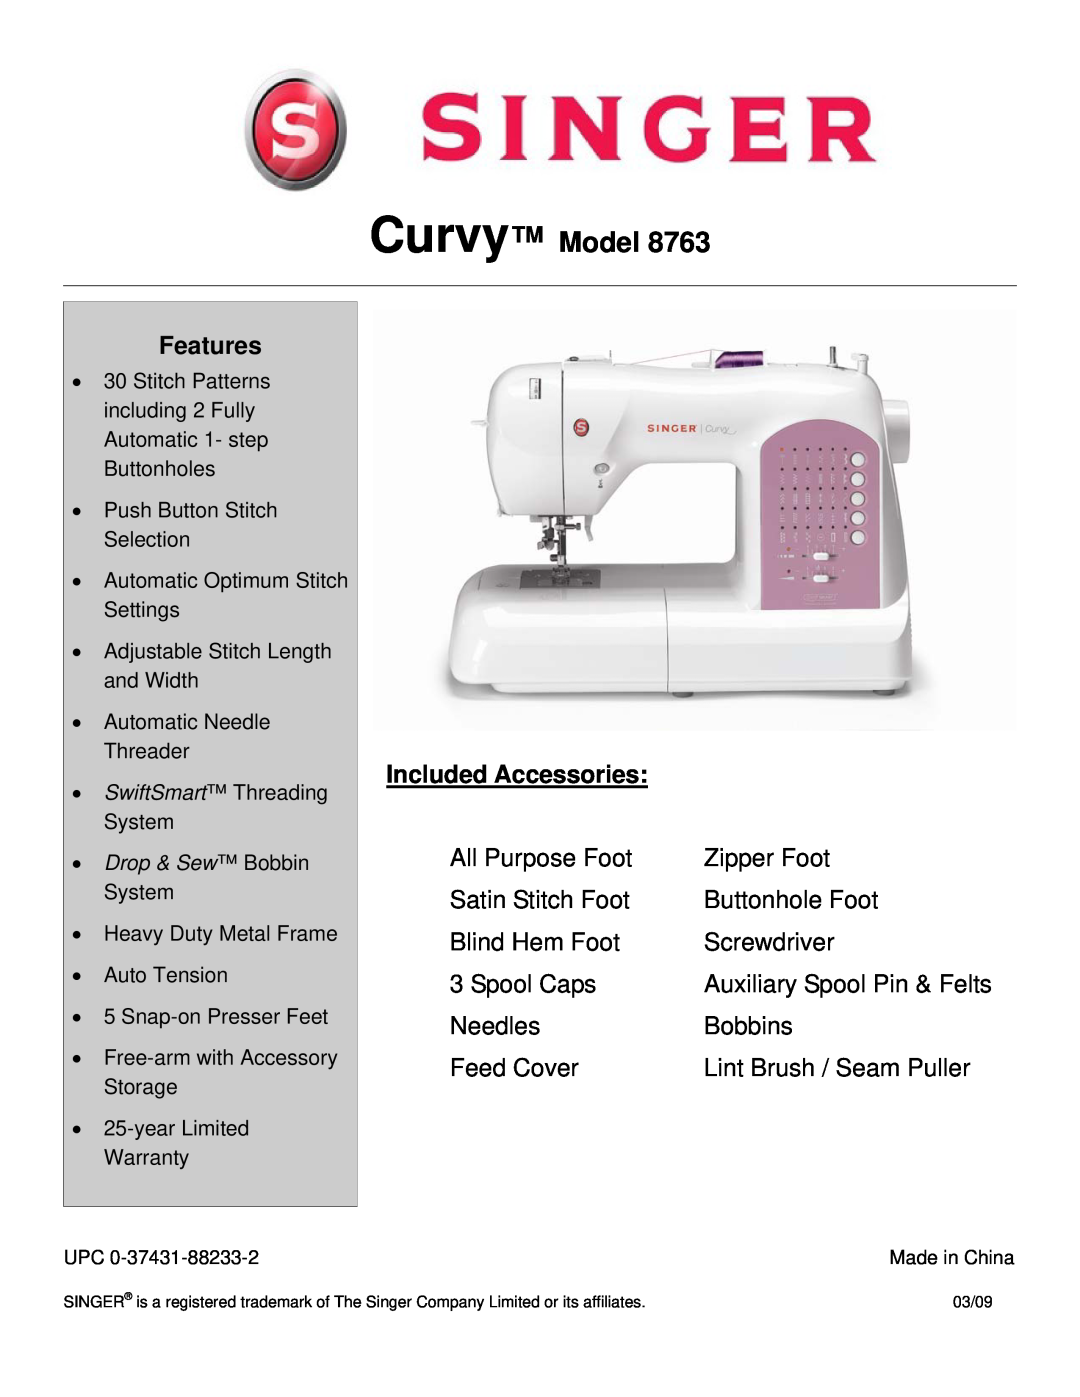 Singer 8763 warranty Curvy Model, Features, Included Accessories 